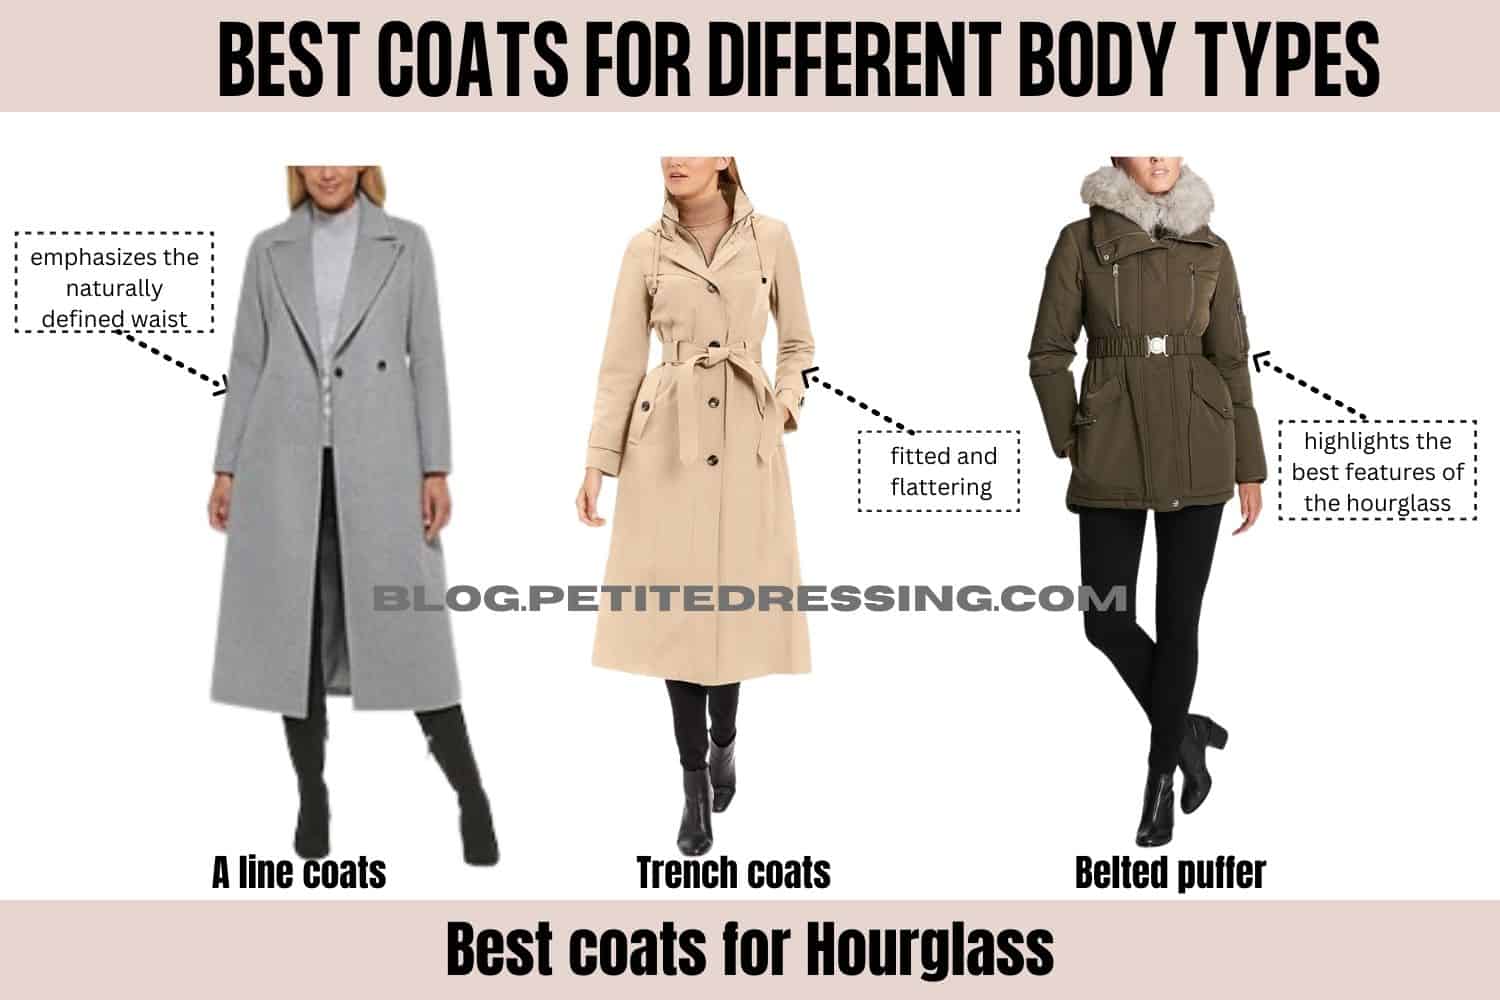 How to Choose the Best Coats for Different Body Types